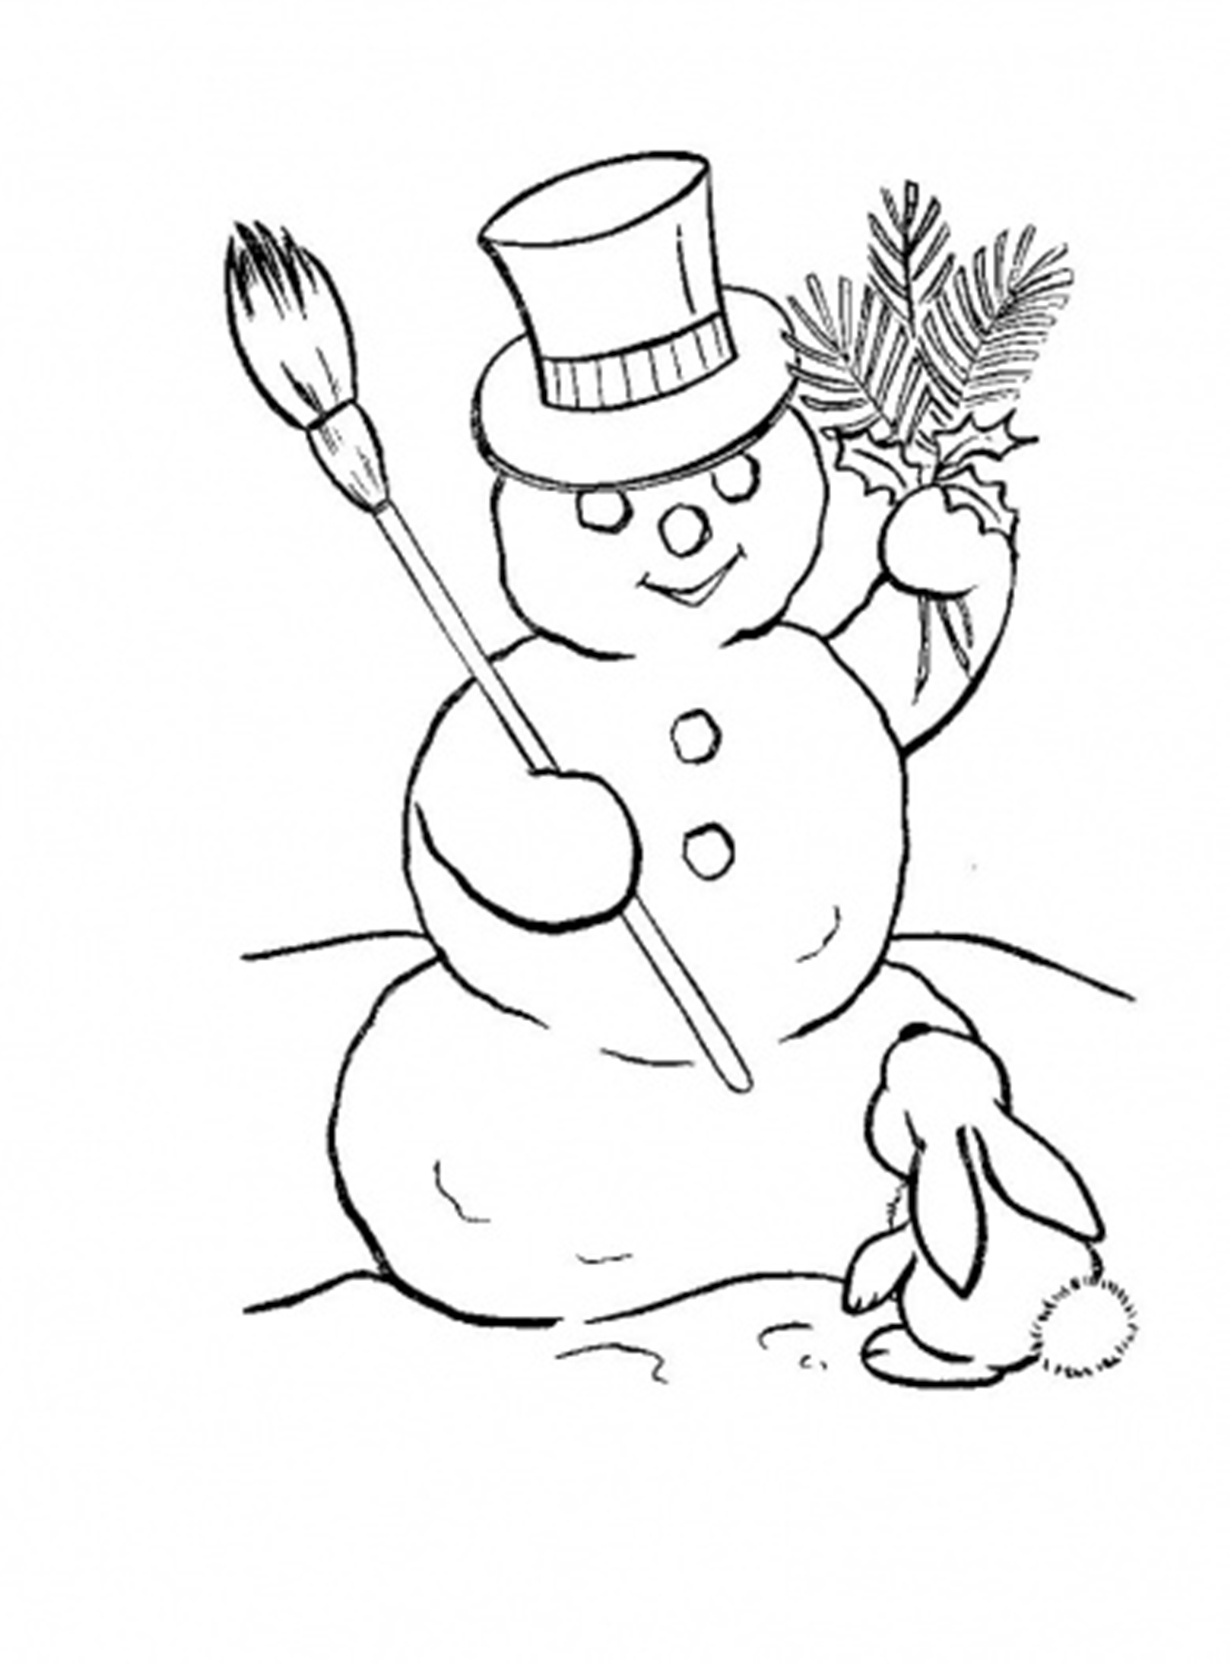 Rabbit And Snowman S To Print D615 Coloring Page